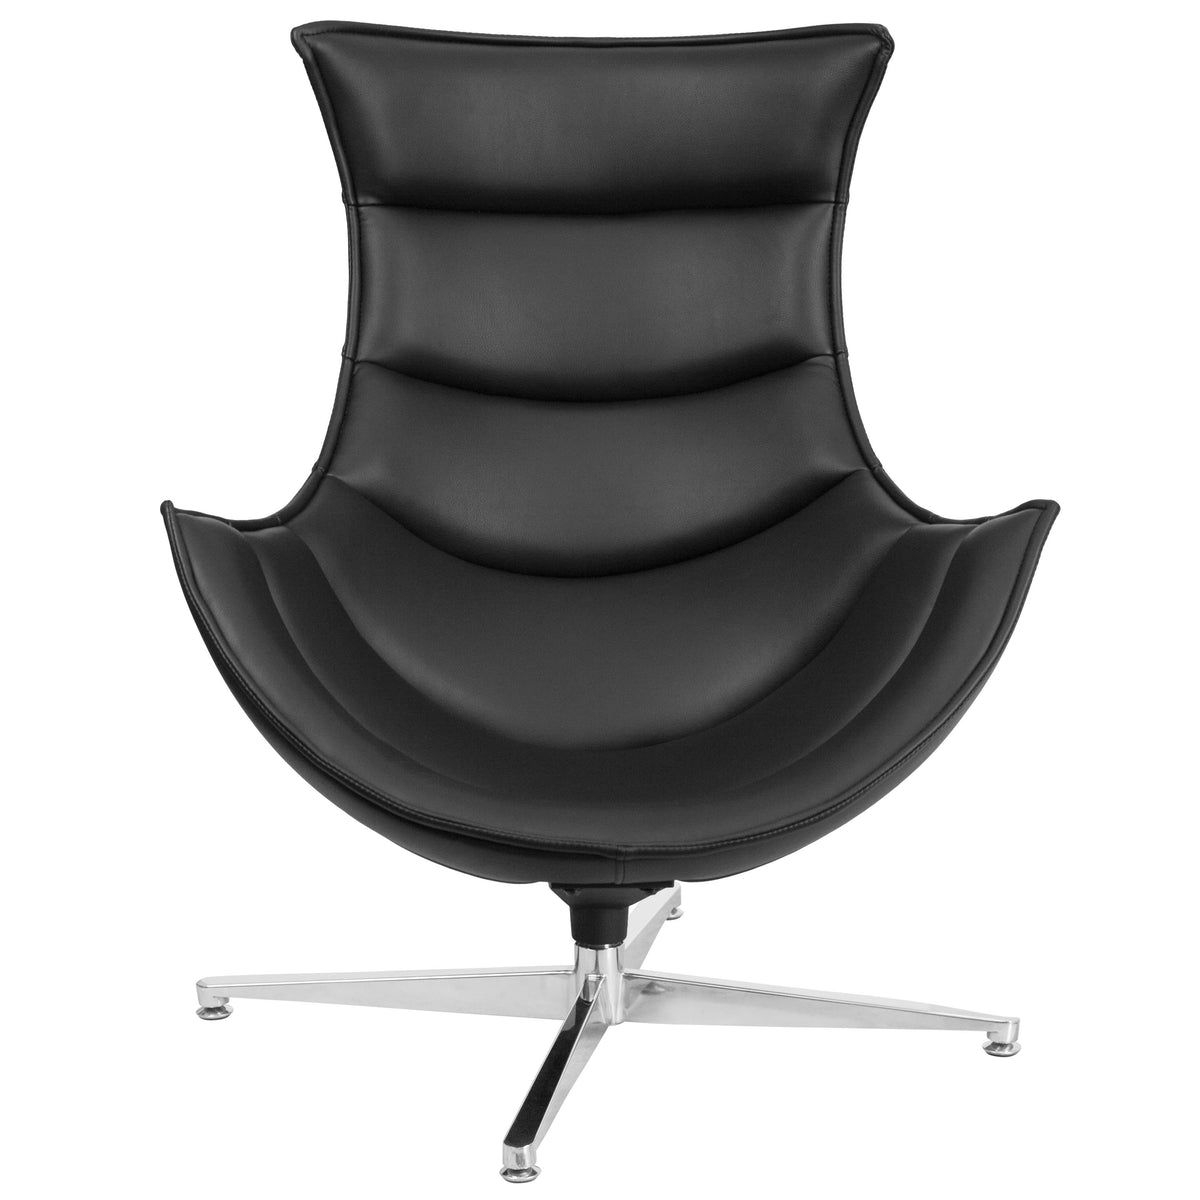 Black |#| Black LeatherSoft Upholstered Swivel Cocoon Chair w/Integrated Curved Arms